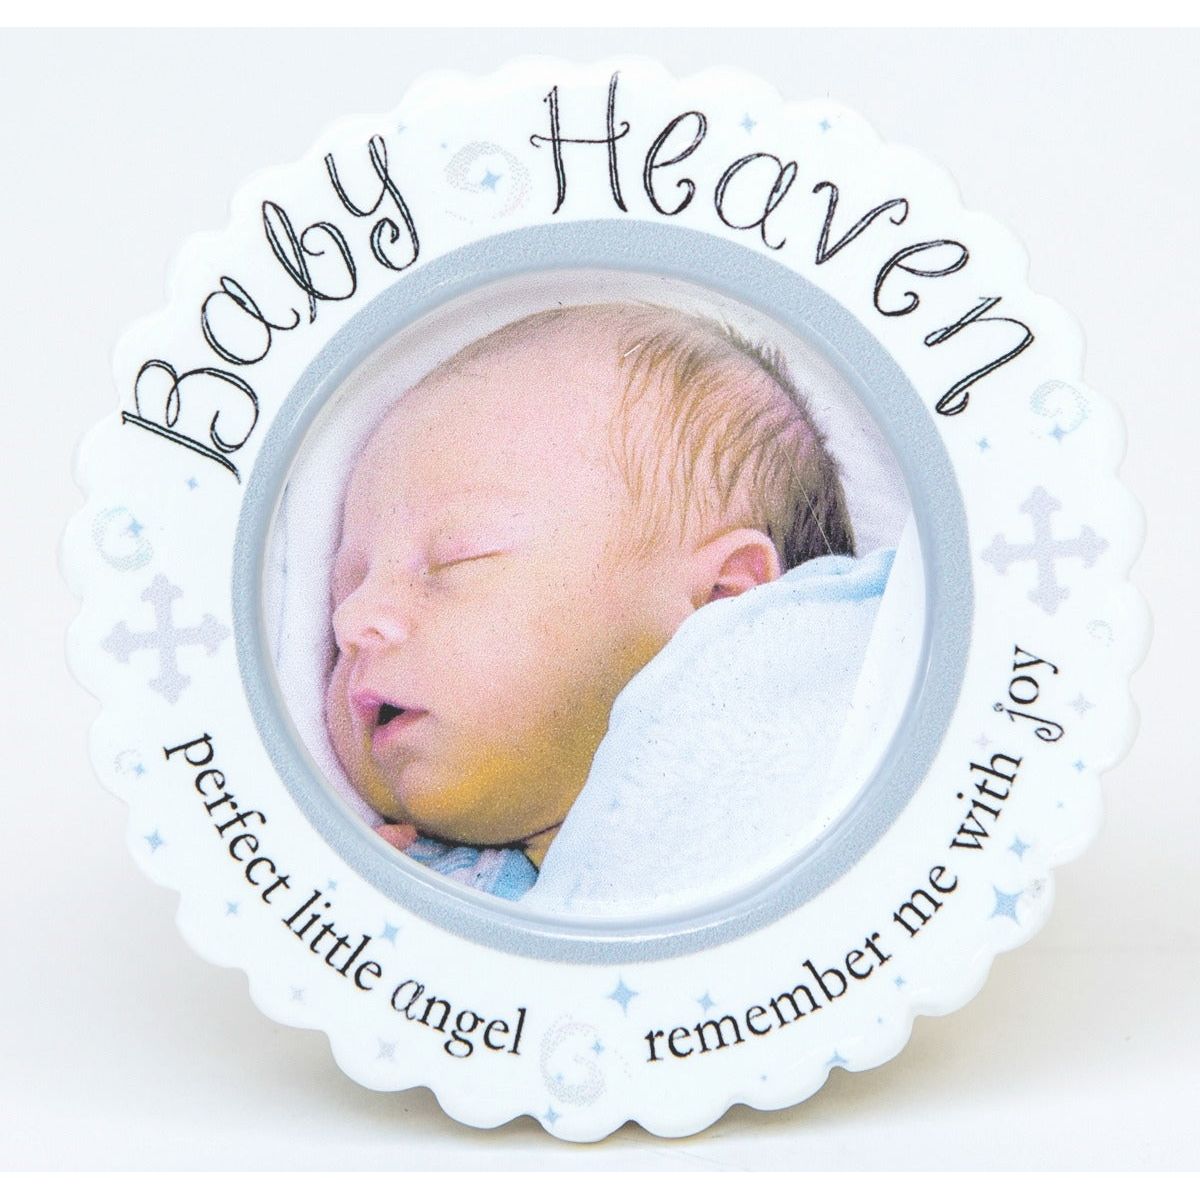 Ceramic ornament with the words &quot;Baby Heaven&quot; and the phrases &quot;perfect little angel&quot; and &quot;remember me with joy&quot;.